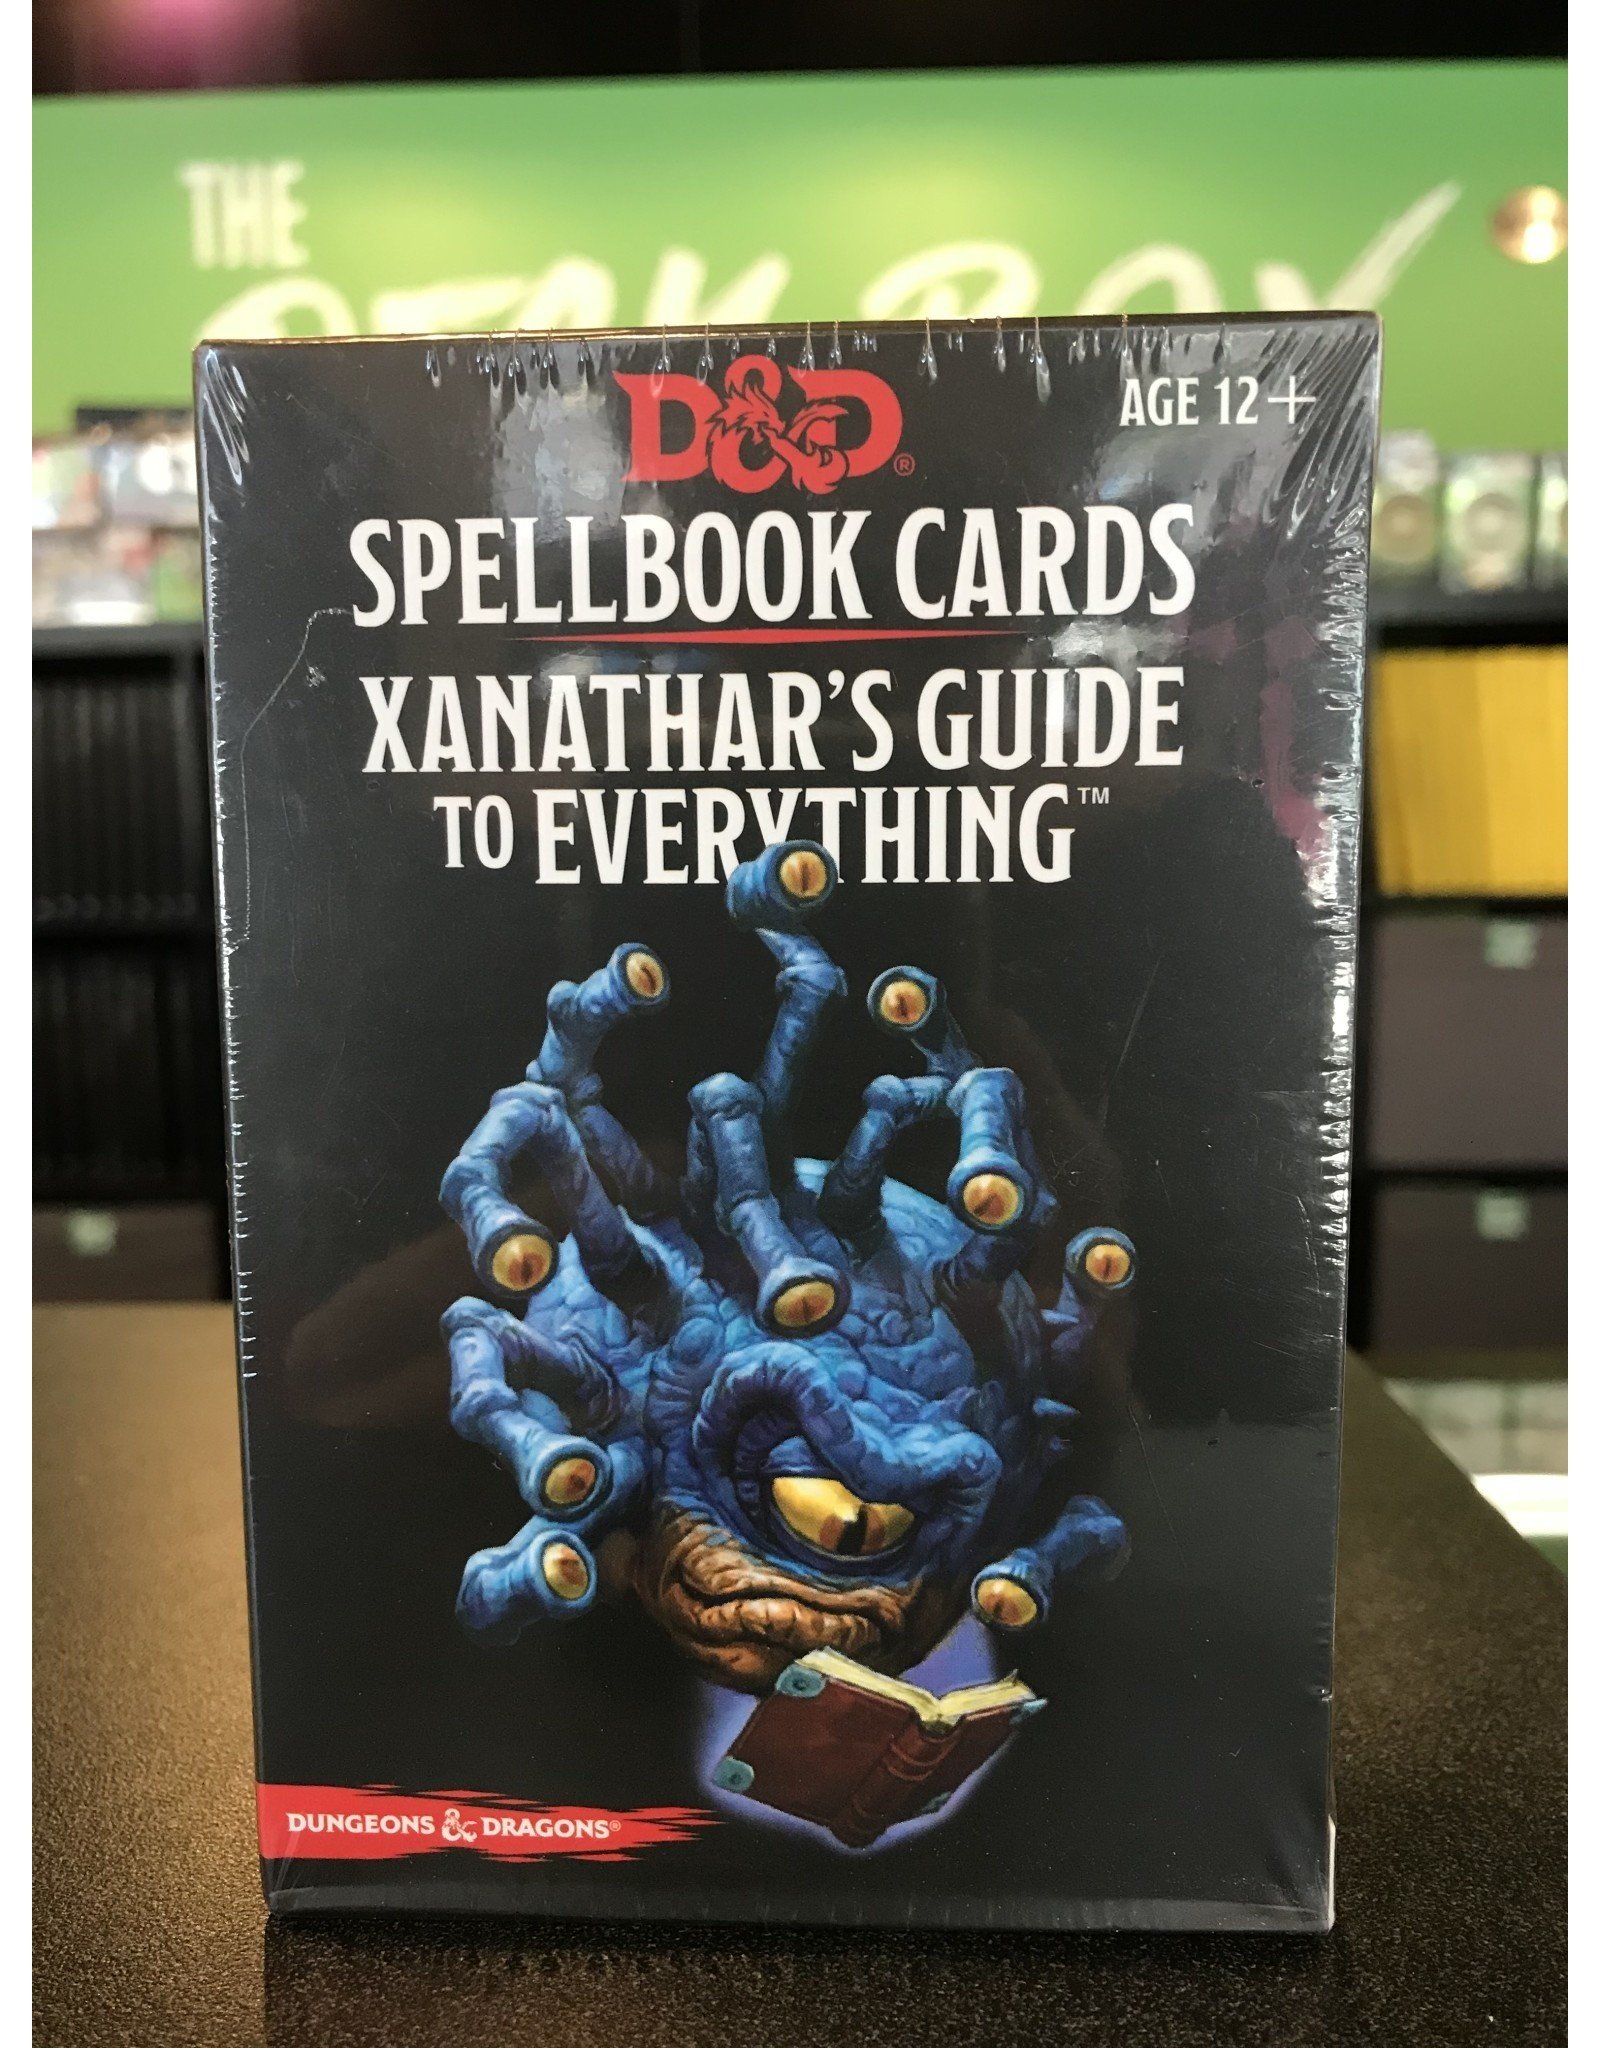 Dungeons & Dragons DND SPELLBOOK CARDS XANATHAR'S GUIDE (24)